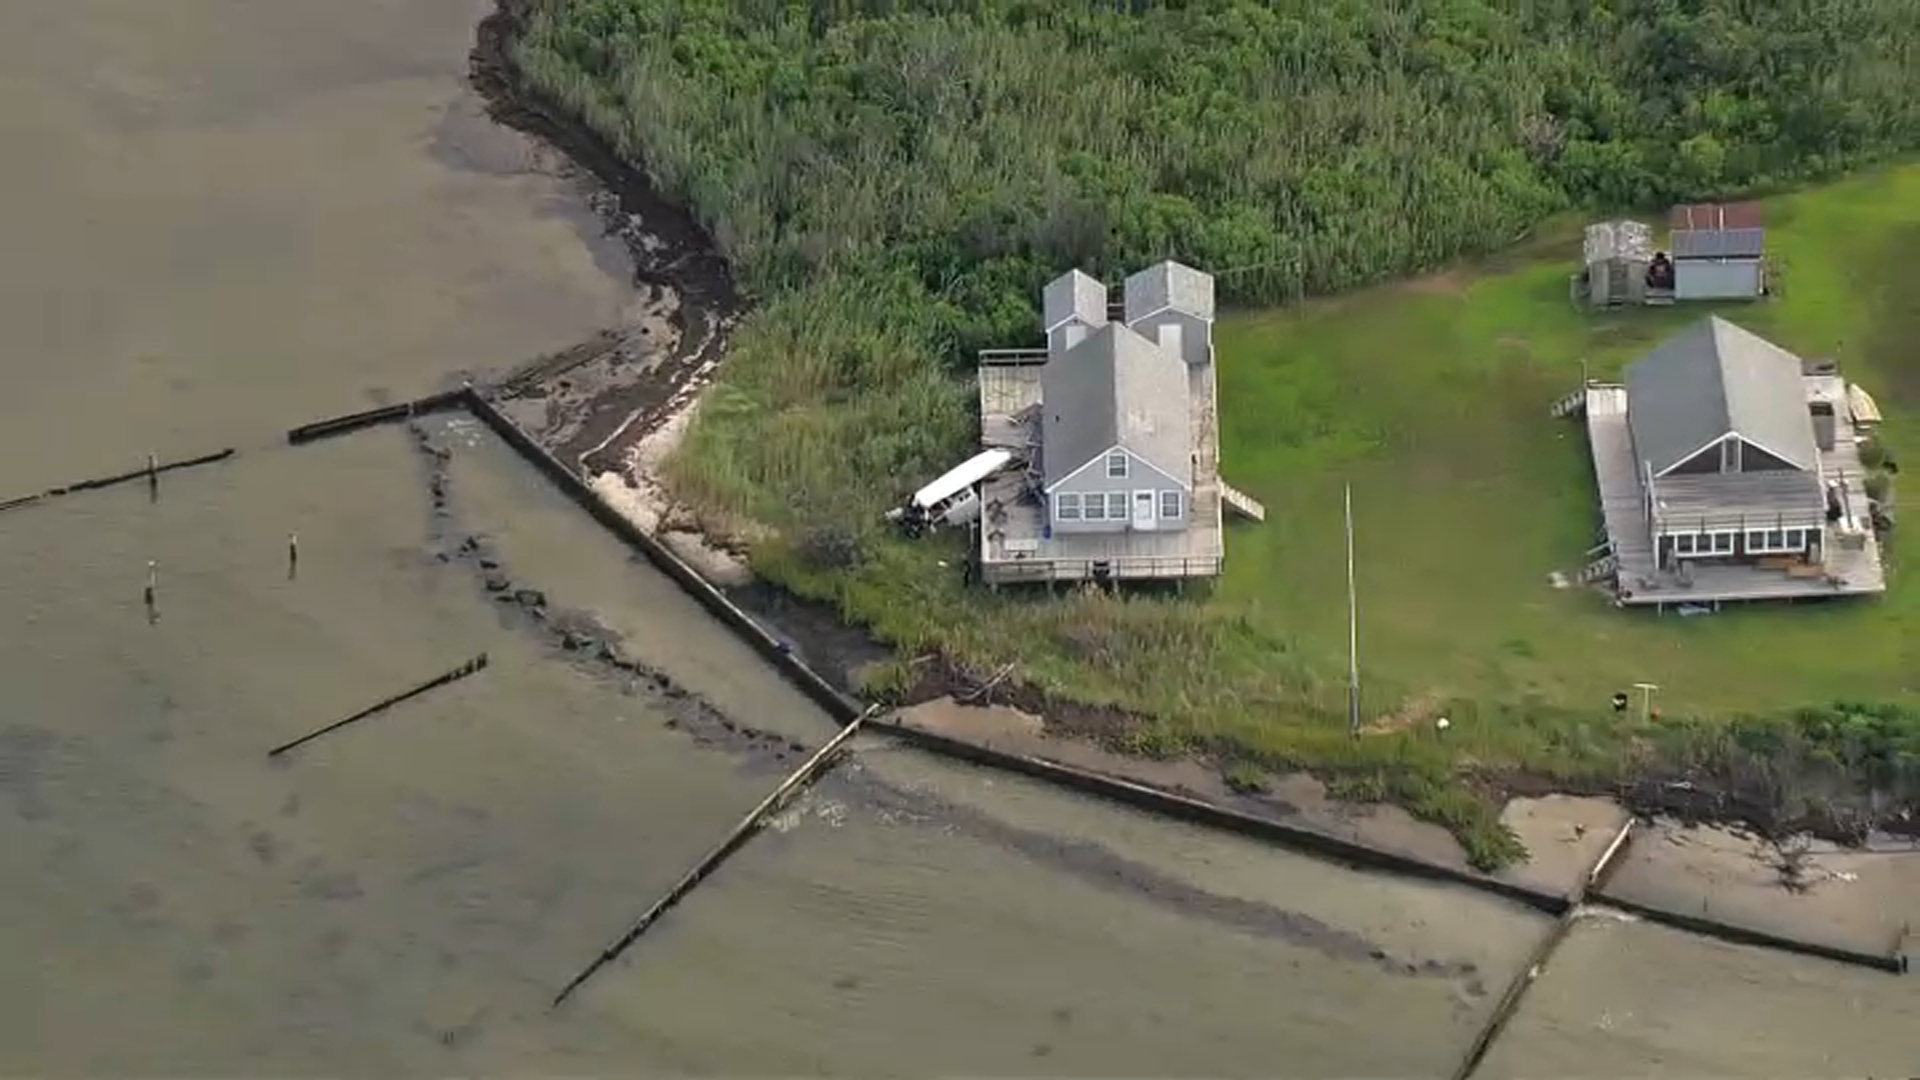 A boat crashed into a house on West Fire Island